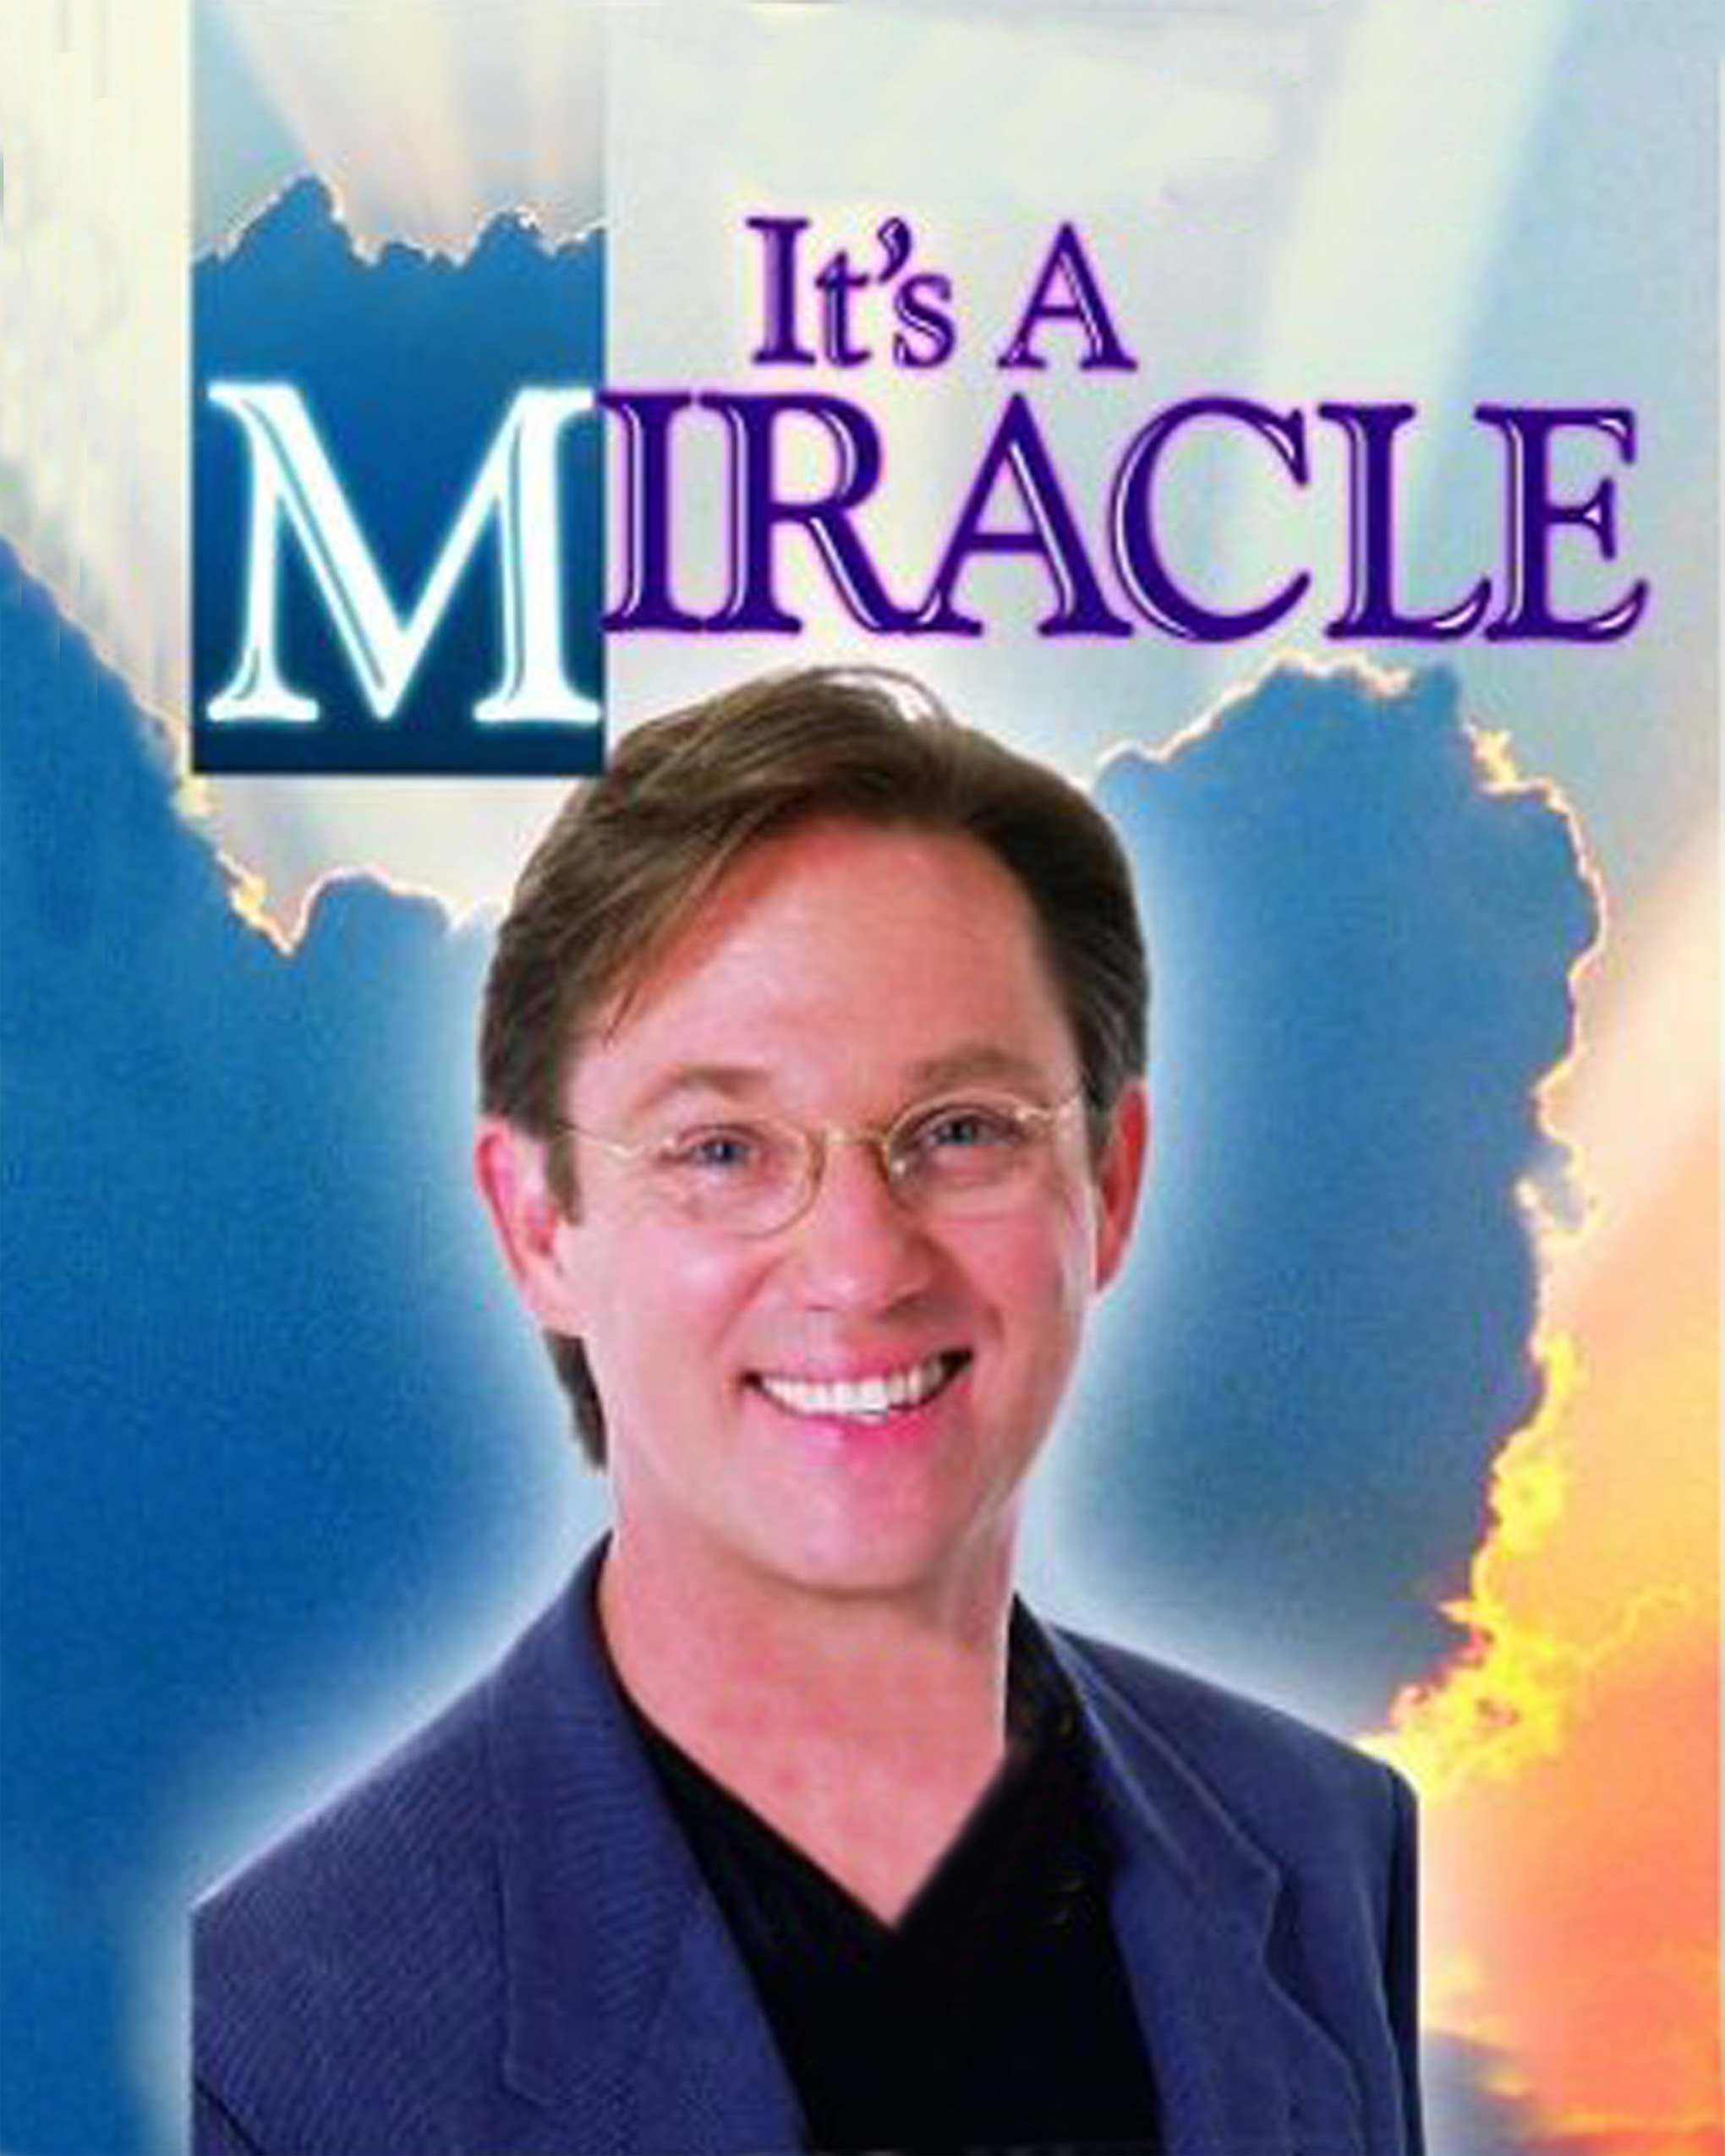 It's A Miracle TV